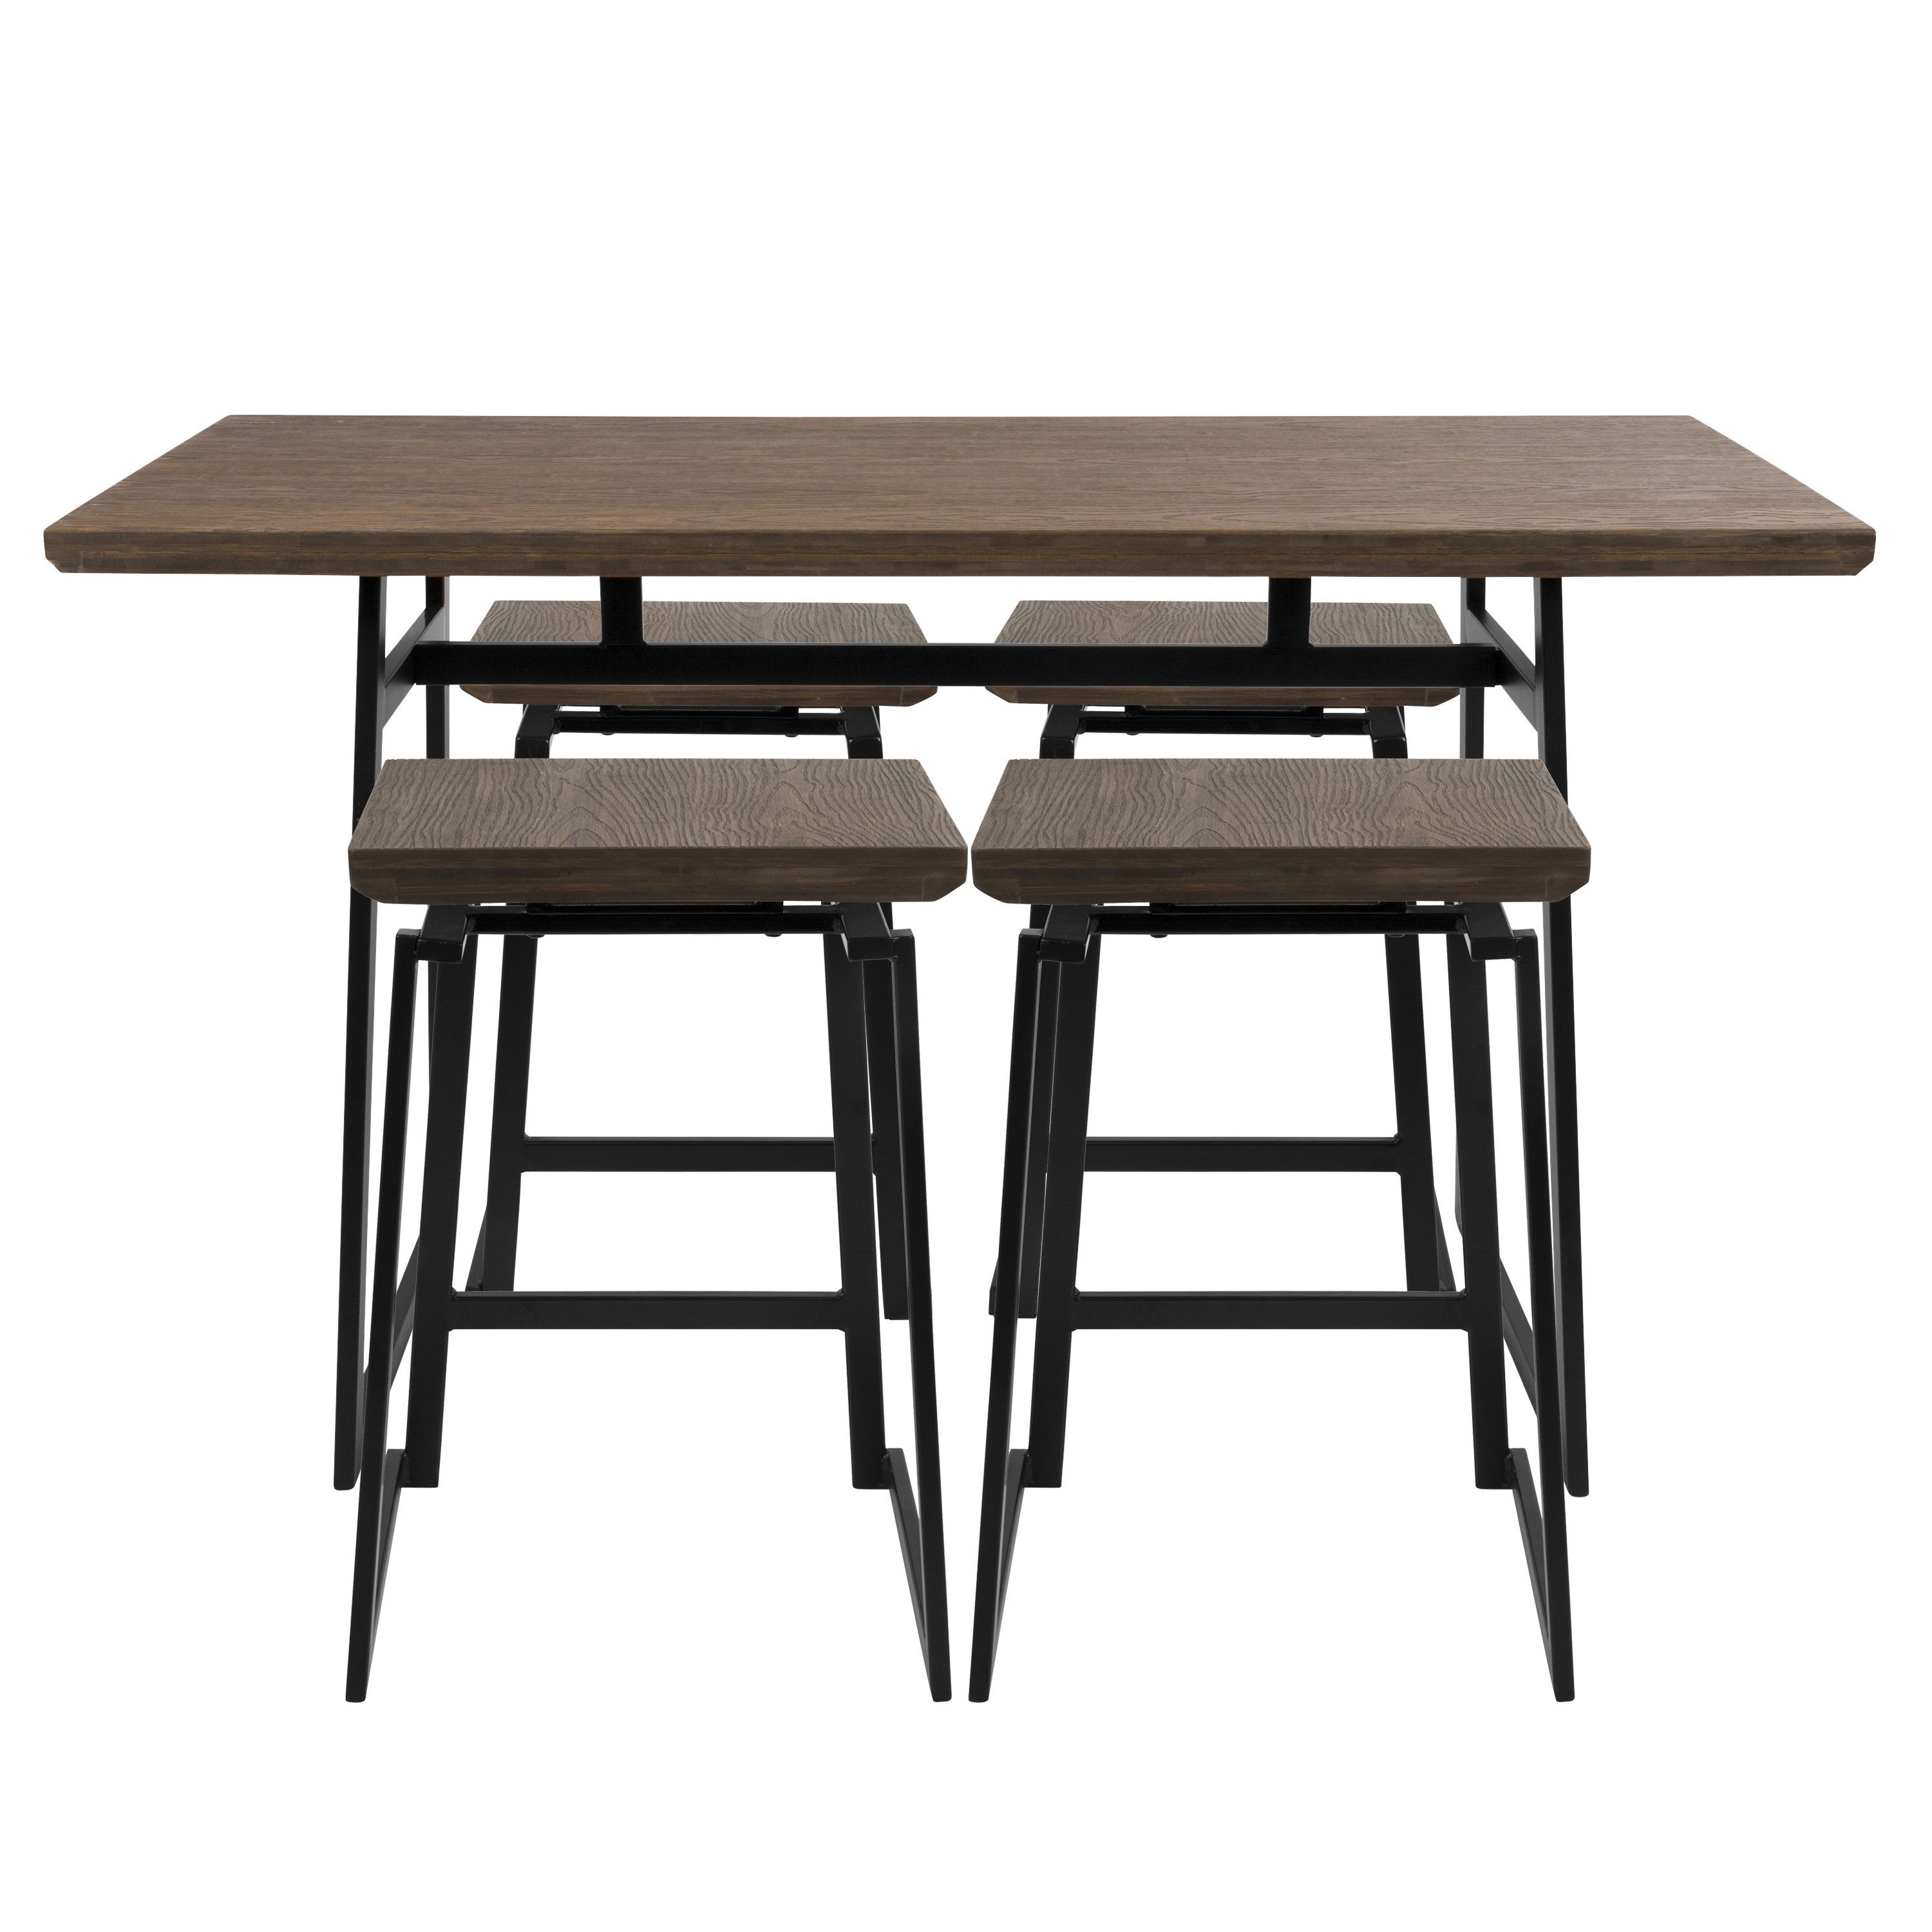 Well Liked Telauges 5 Piece Dining Sets Within Cassiopeia Industrial 5 Piece Counter Height Dining Set & Reviews (View 12 of 25)